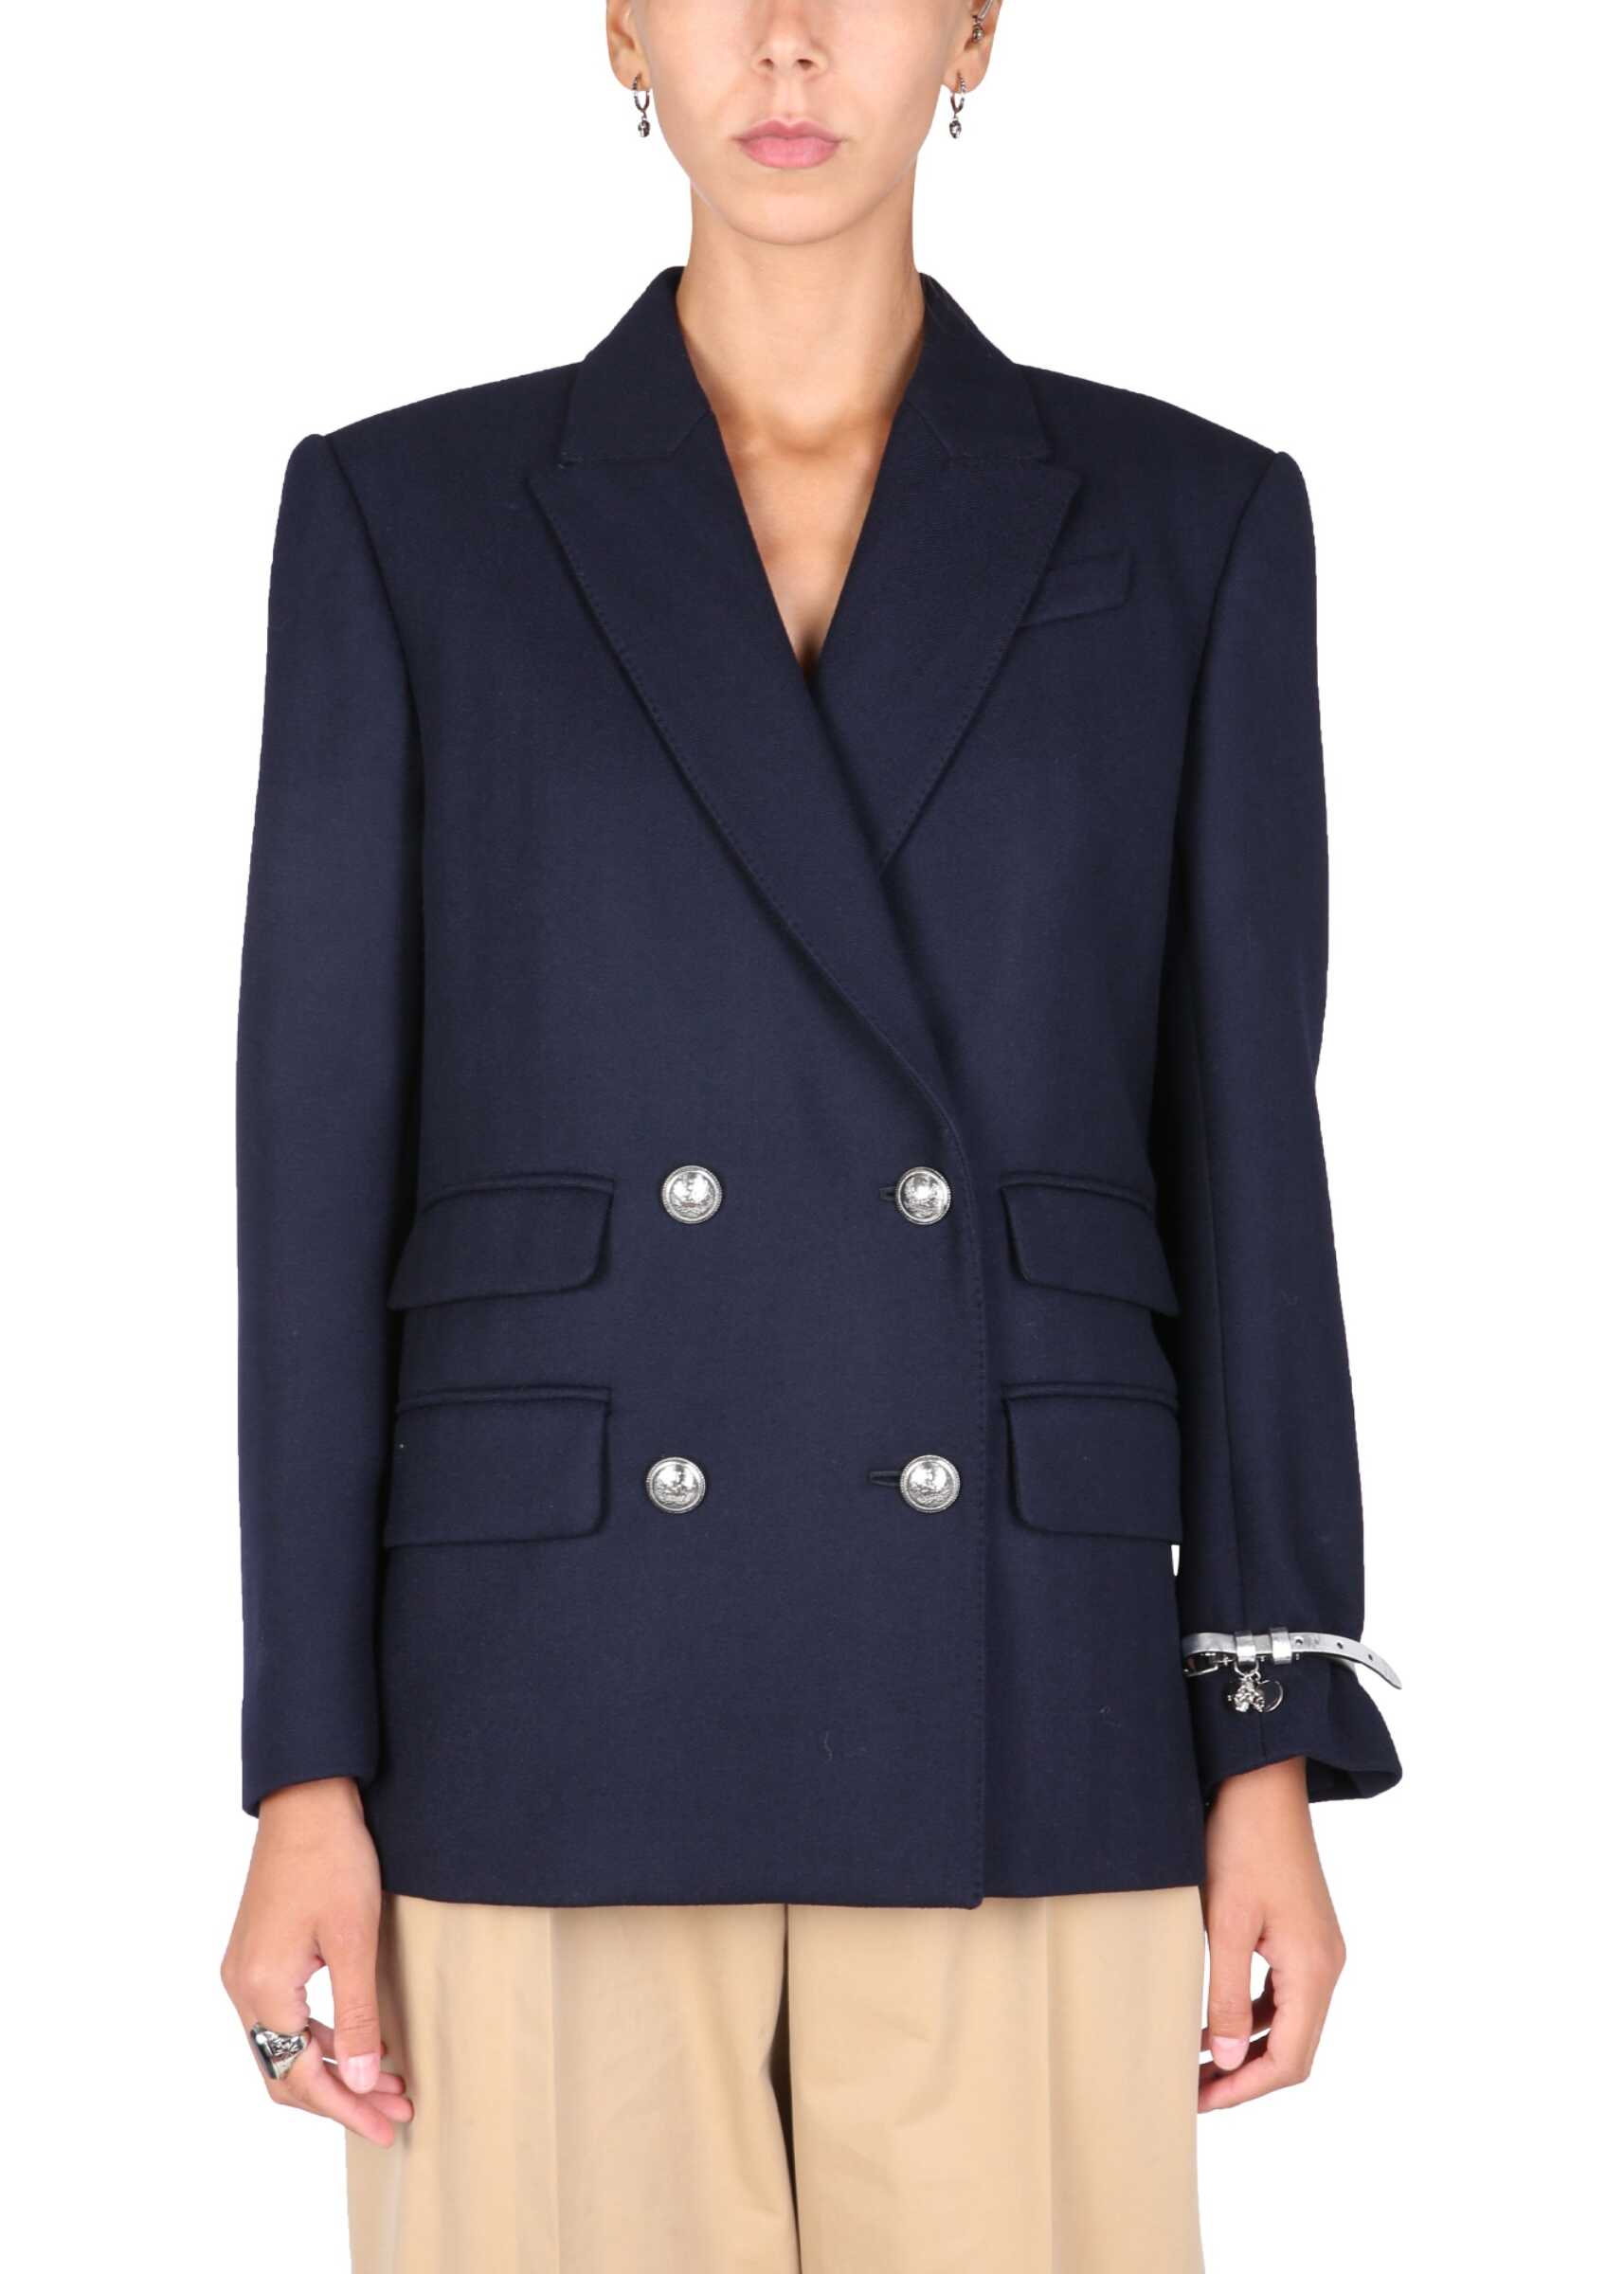 Alexander McQueen Double-Breasted Jacket BLUE